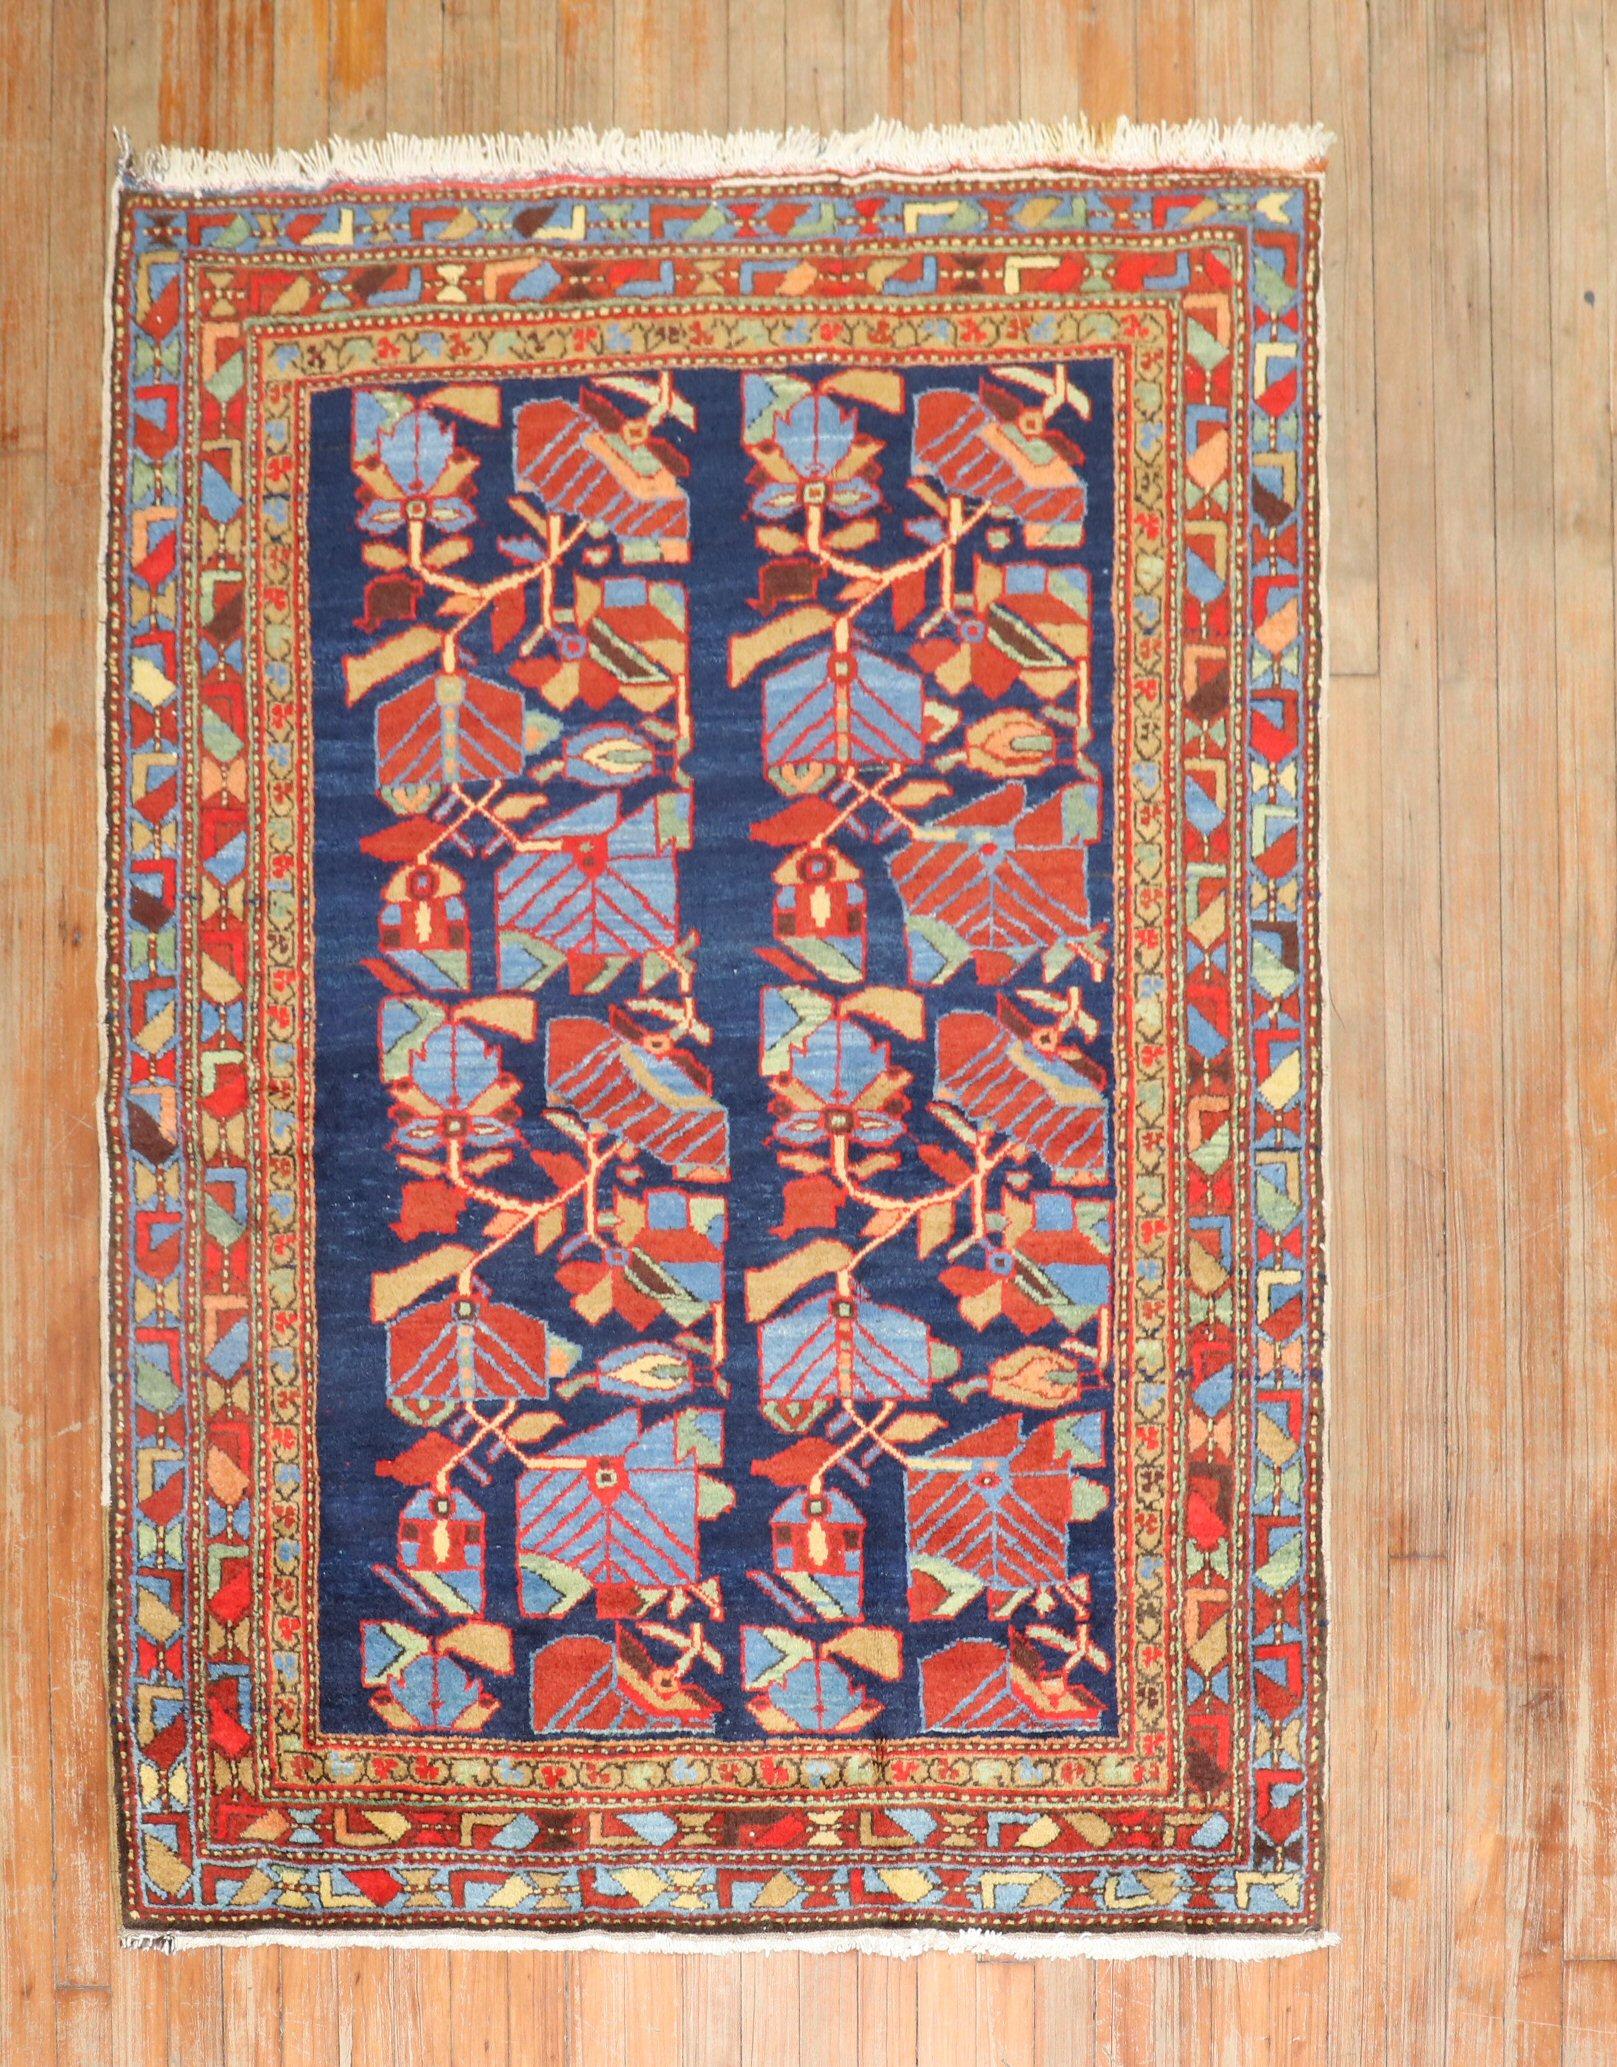 A 2nd quarter of the 20th century Northwest Persia Rug in cheerful colors.

Size 4' x 5' 6